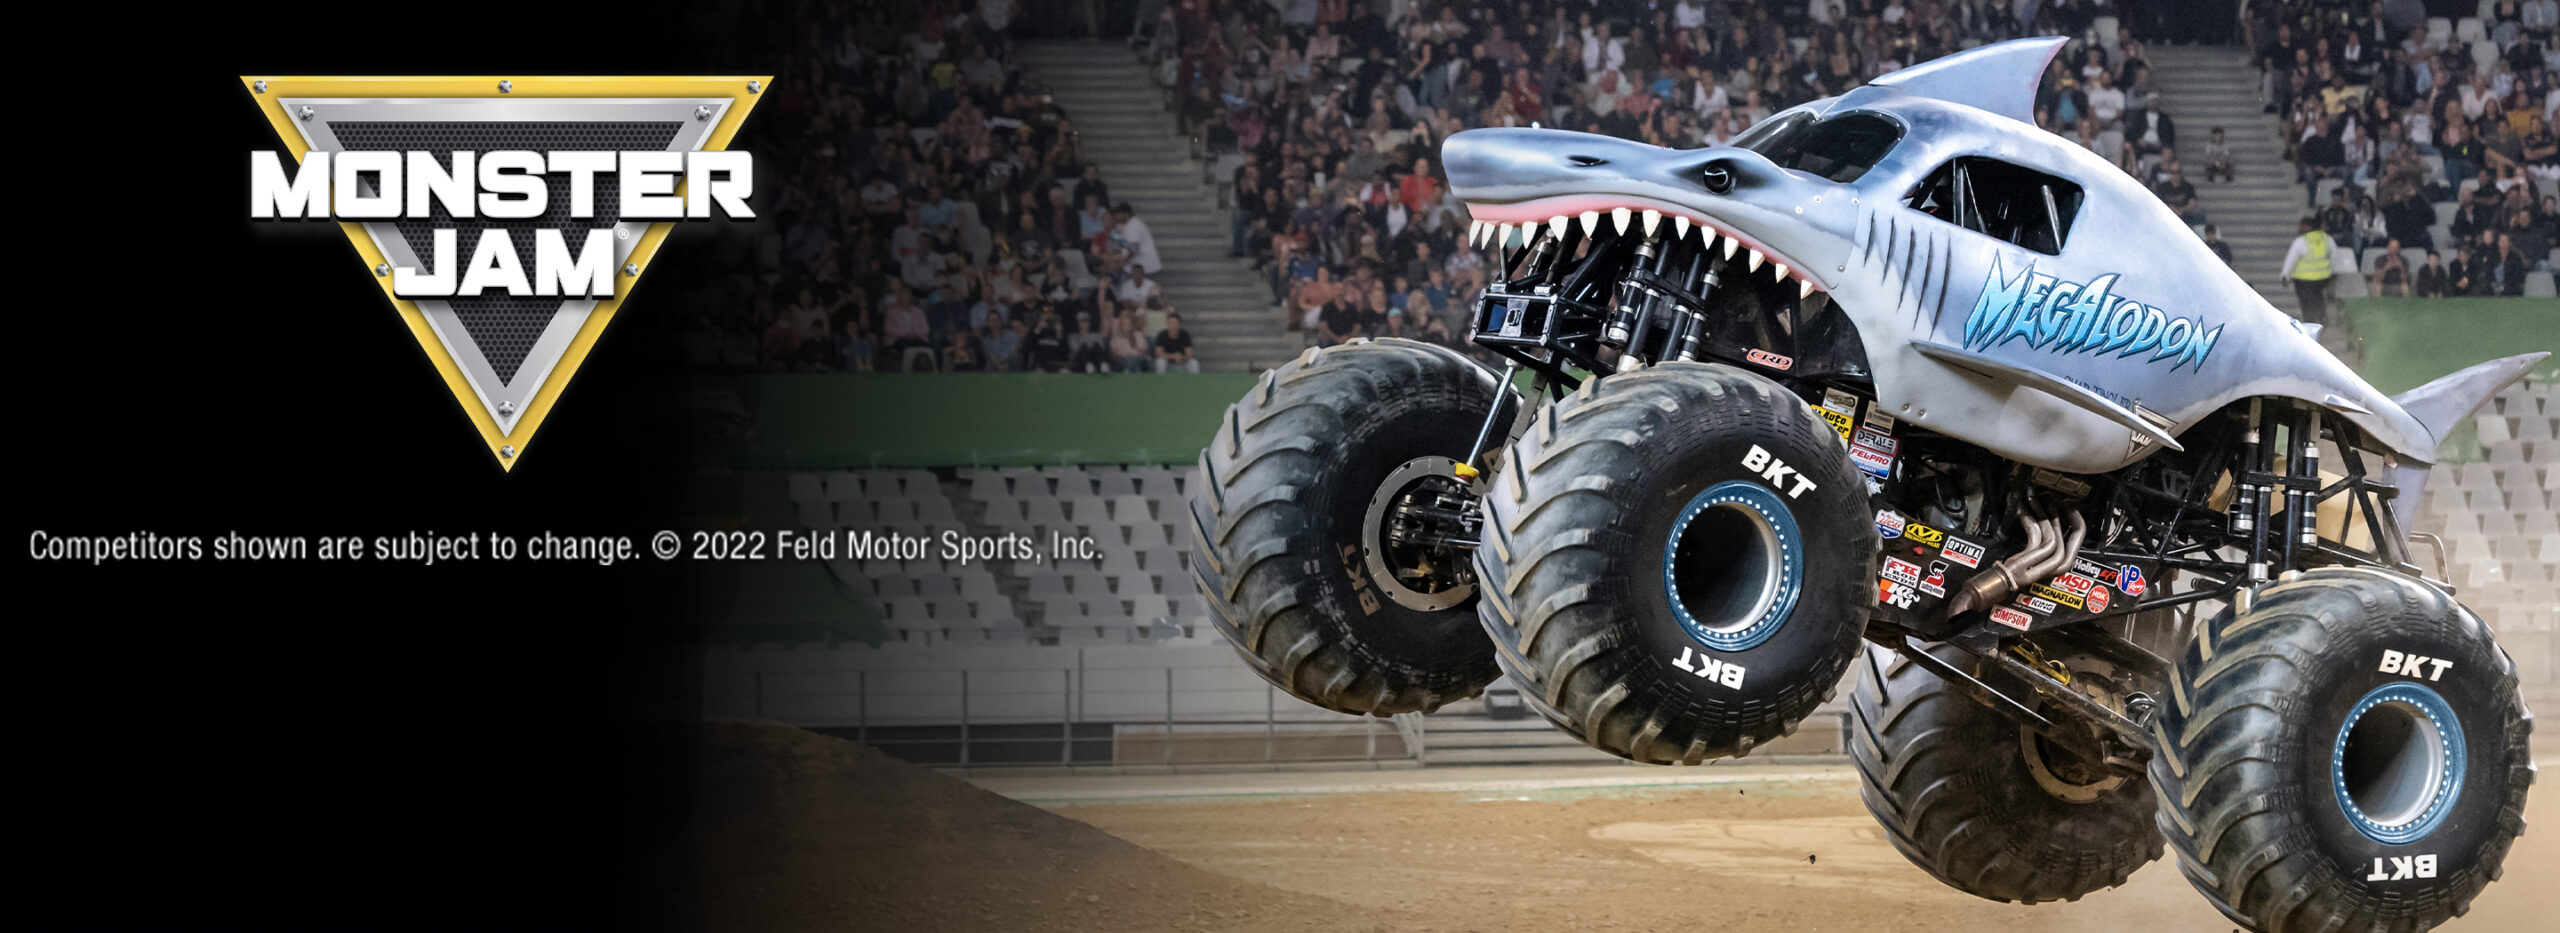 Wichita Events - Monster Jam - February 2023 at Intrust Bank Arena